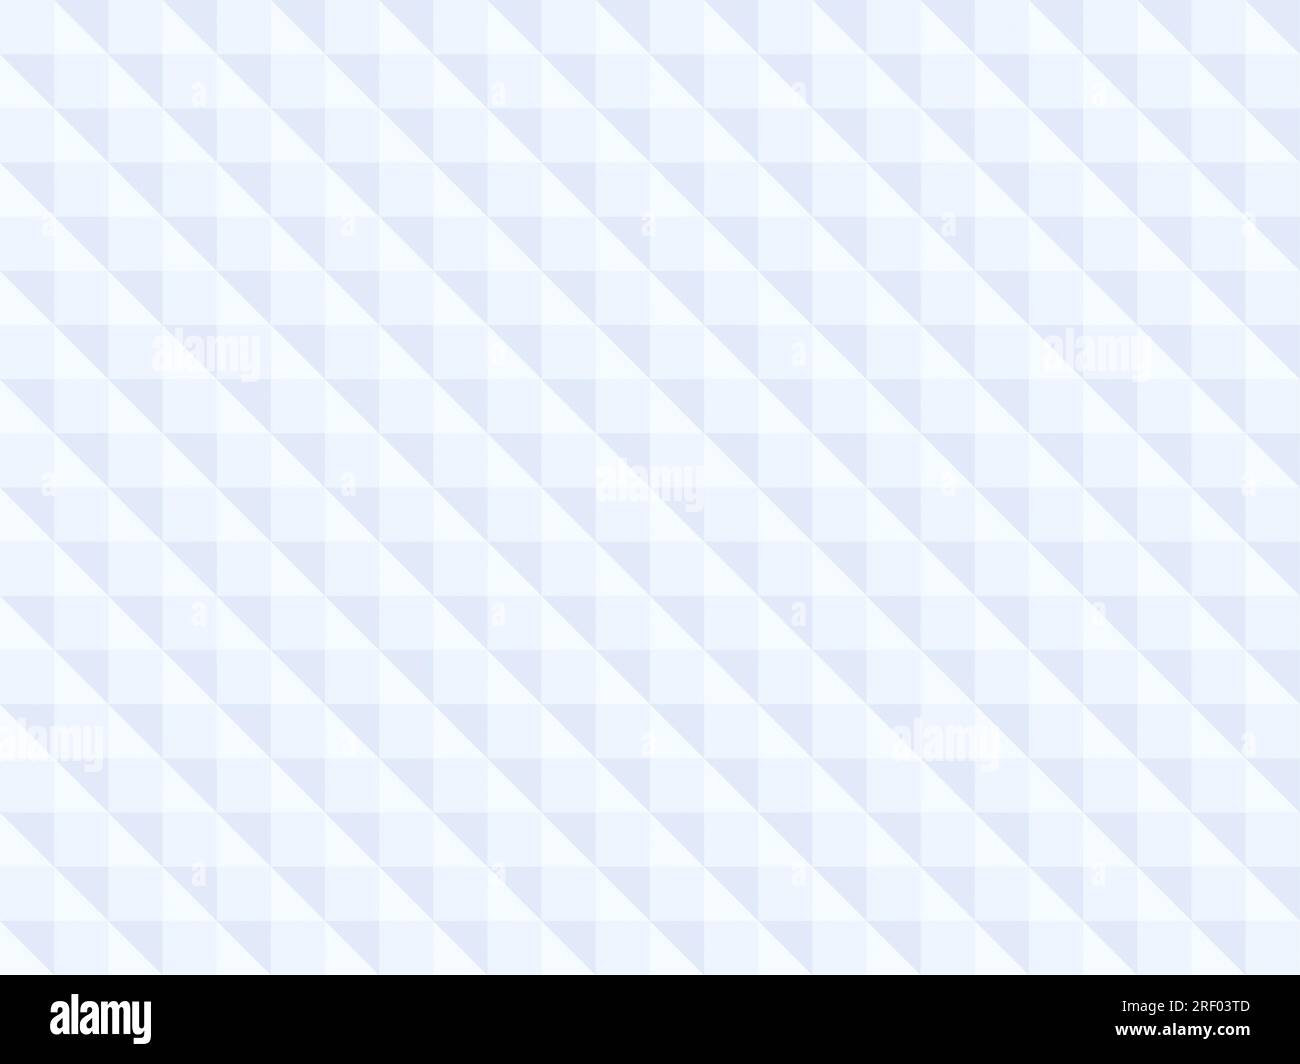 Seamless pattern of light blue and white triangles and squares. Abstract high resolution full frame geometric background. Copy space. Stock Photo